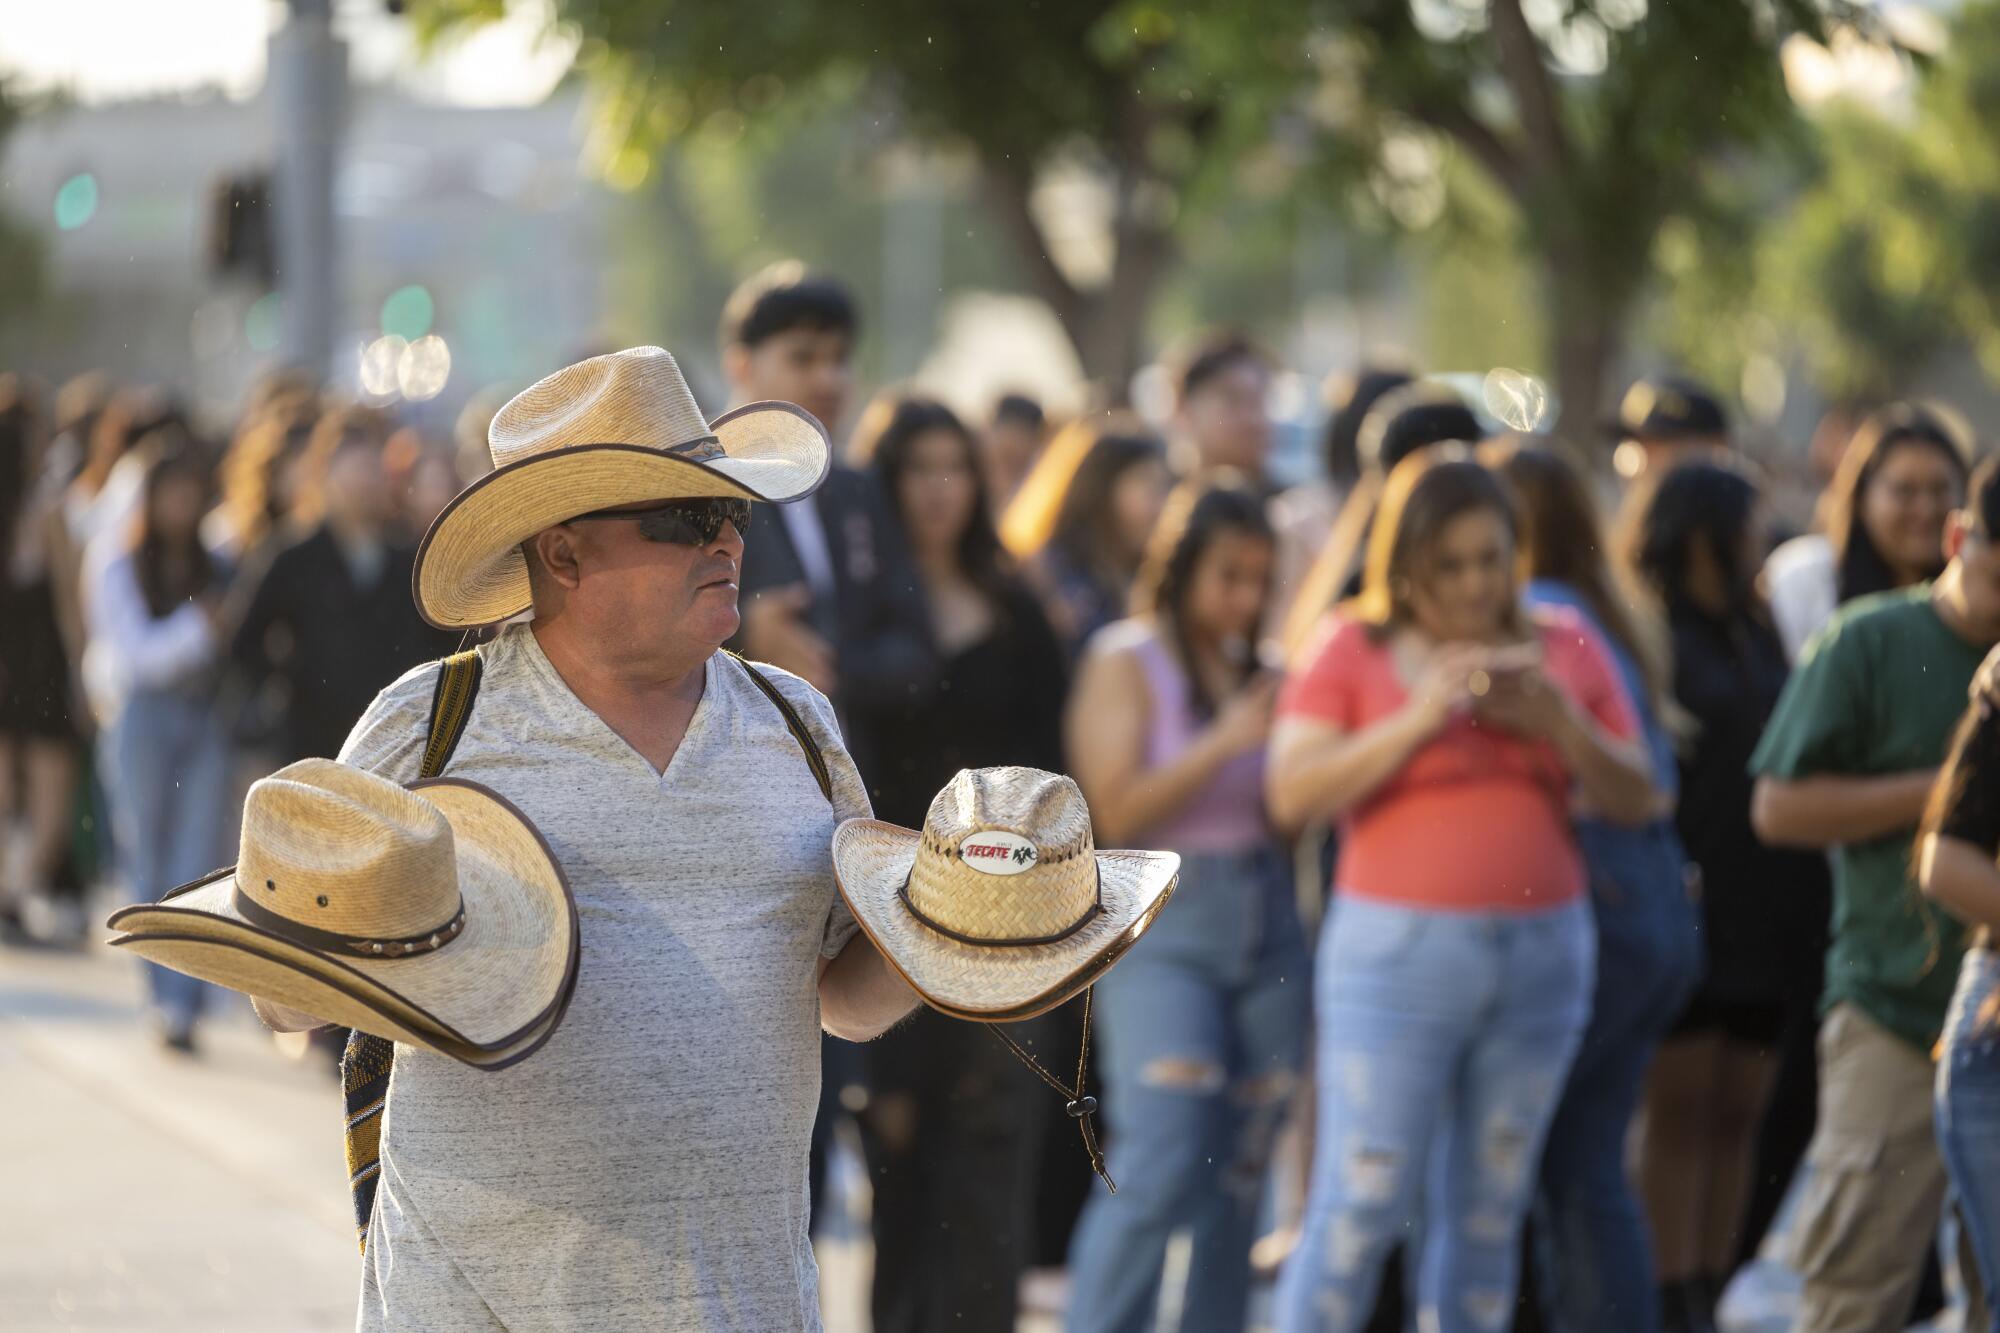 A hat seller walks along a line of people in a line.